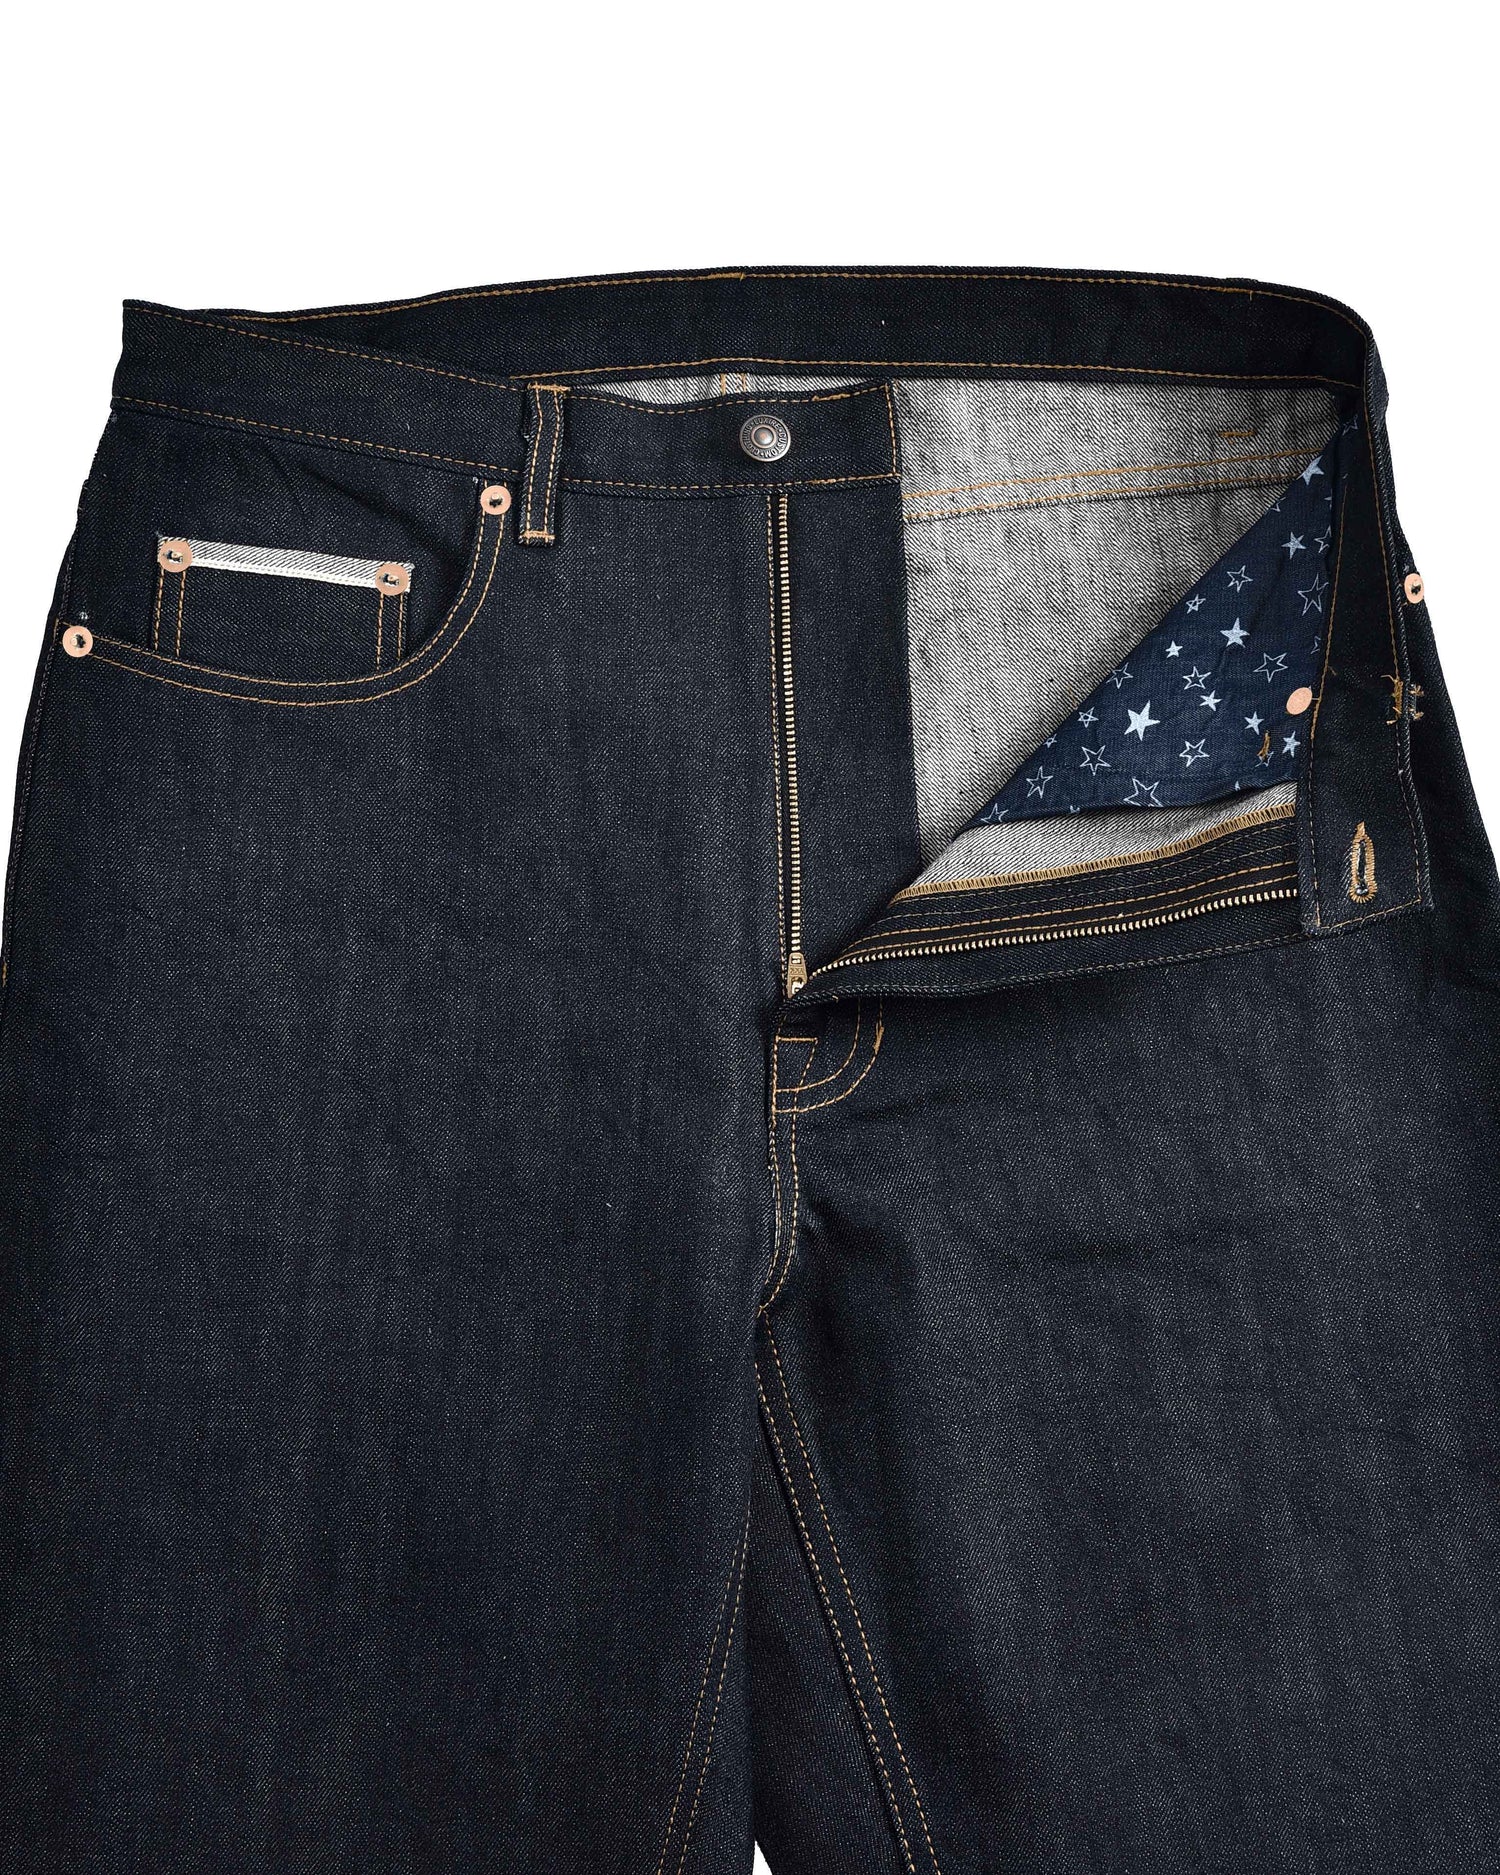 Front open view of mens Japanese Kaihara jeans by Luxire in indigo